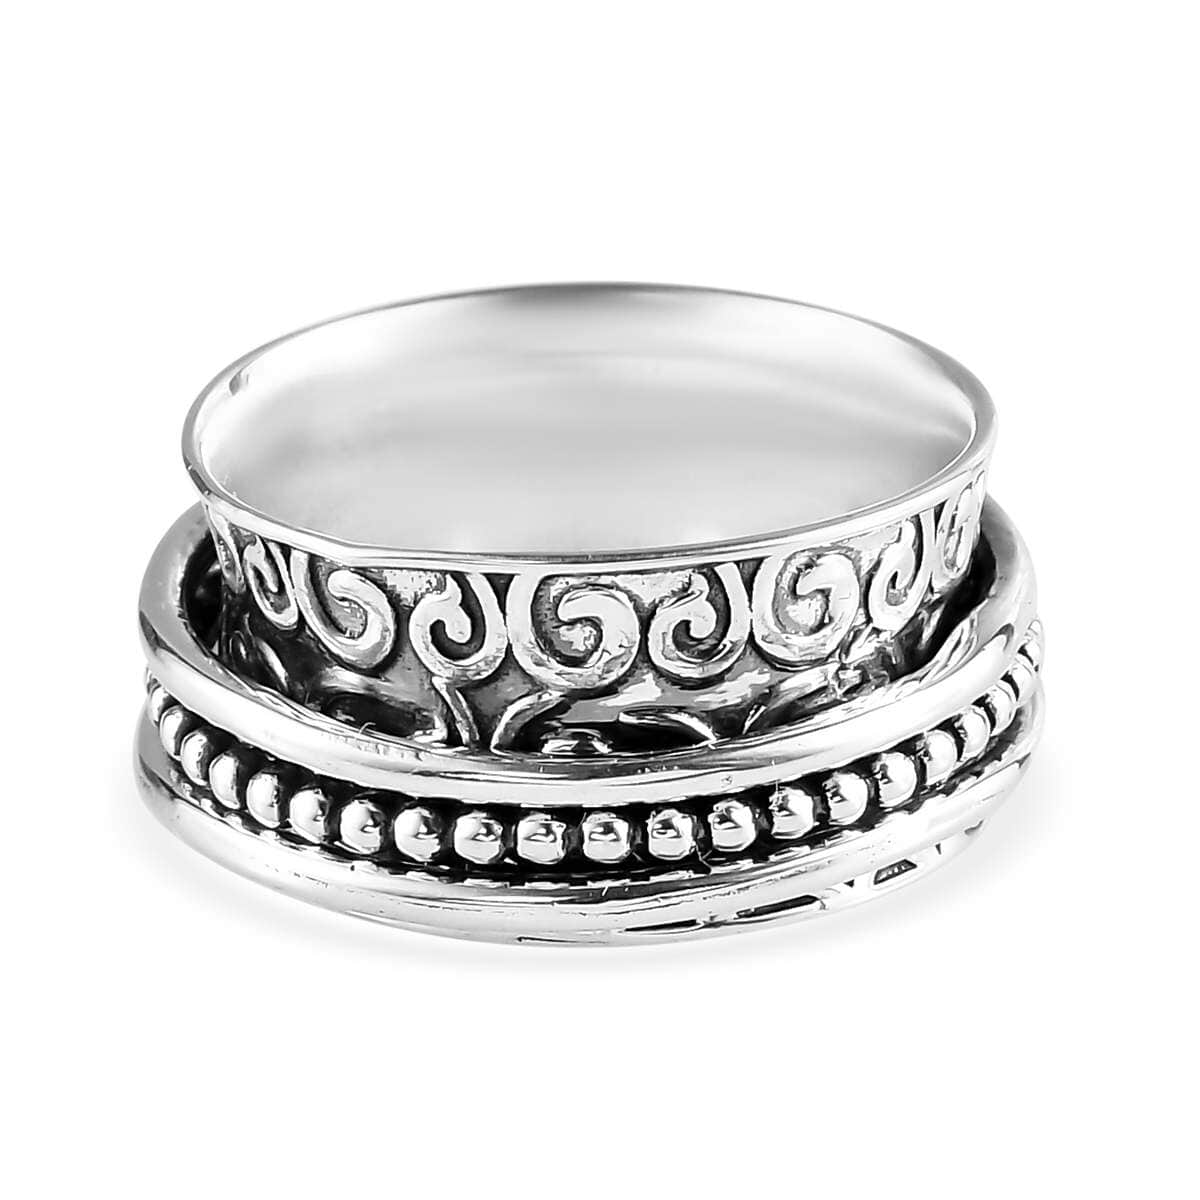 Spinner Ring For Women in Sterling Silver, Fidget Band Ring, Fidget Rings For Anxiety, Promise Rings For Women, Filigree Silver Band Ring (Size 11.0) 3.90 Grams image number 6